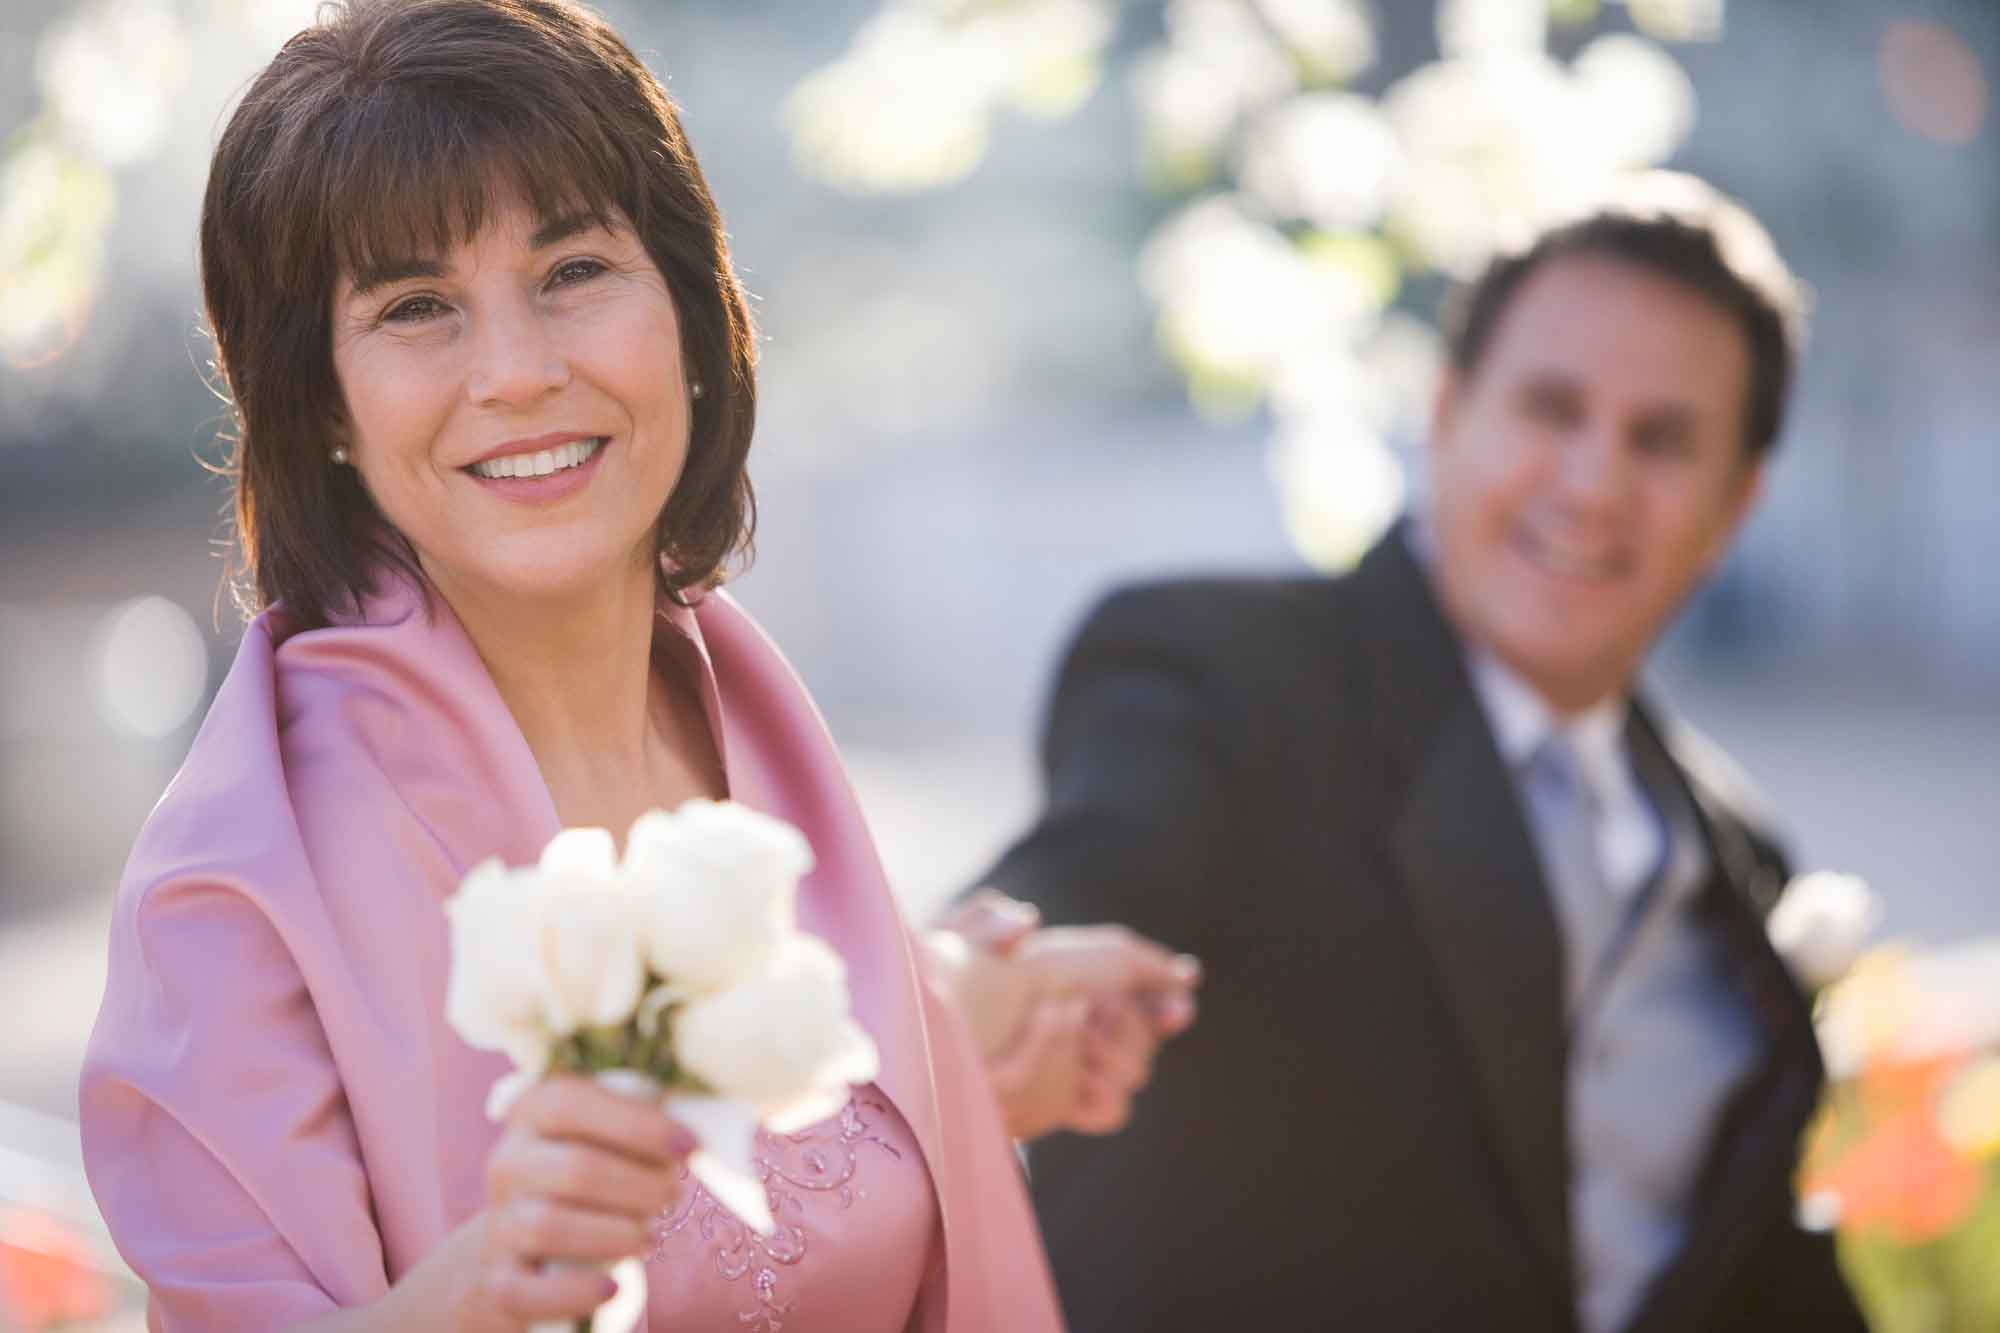 Discover how to choose a good husband.